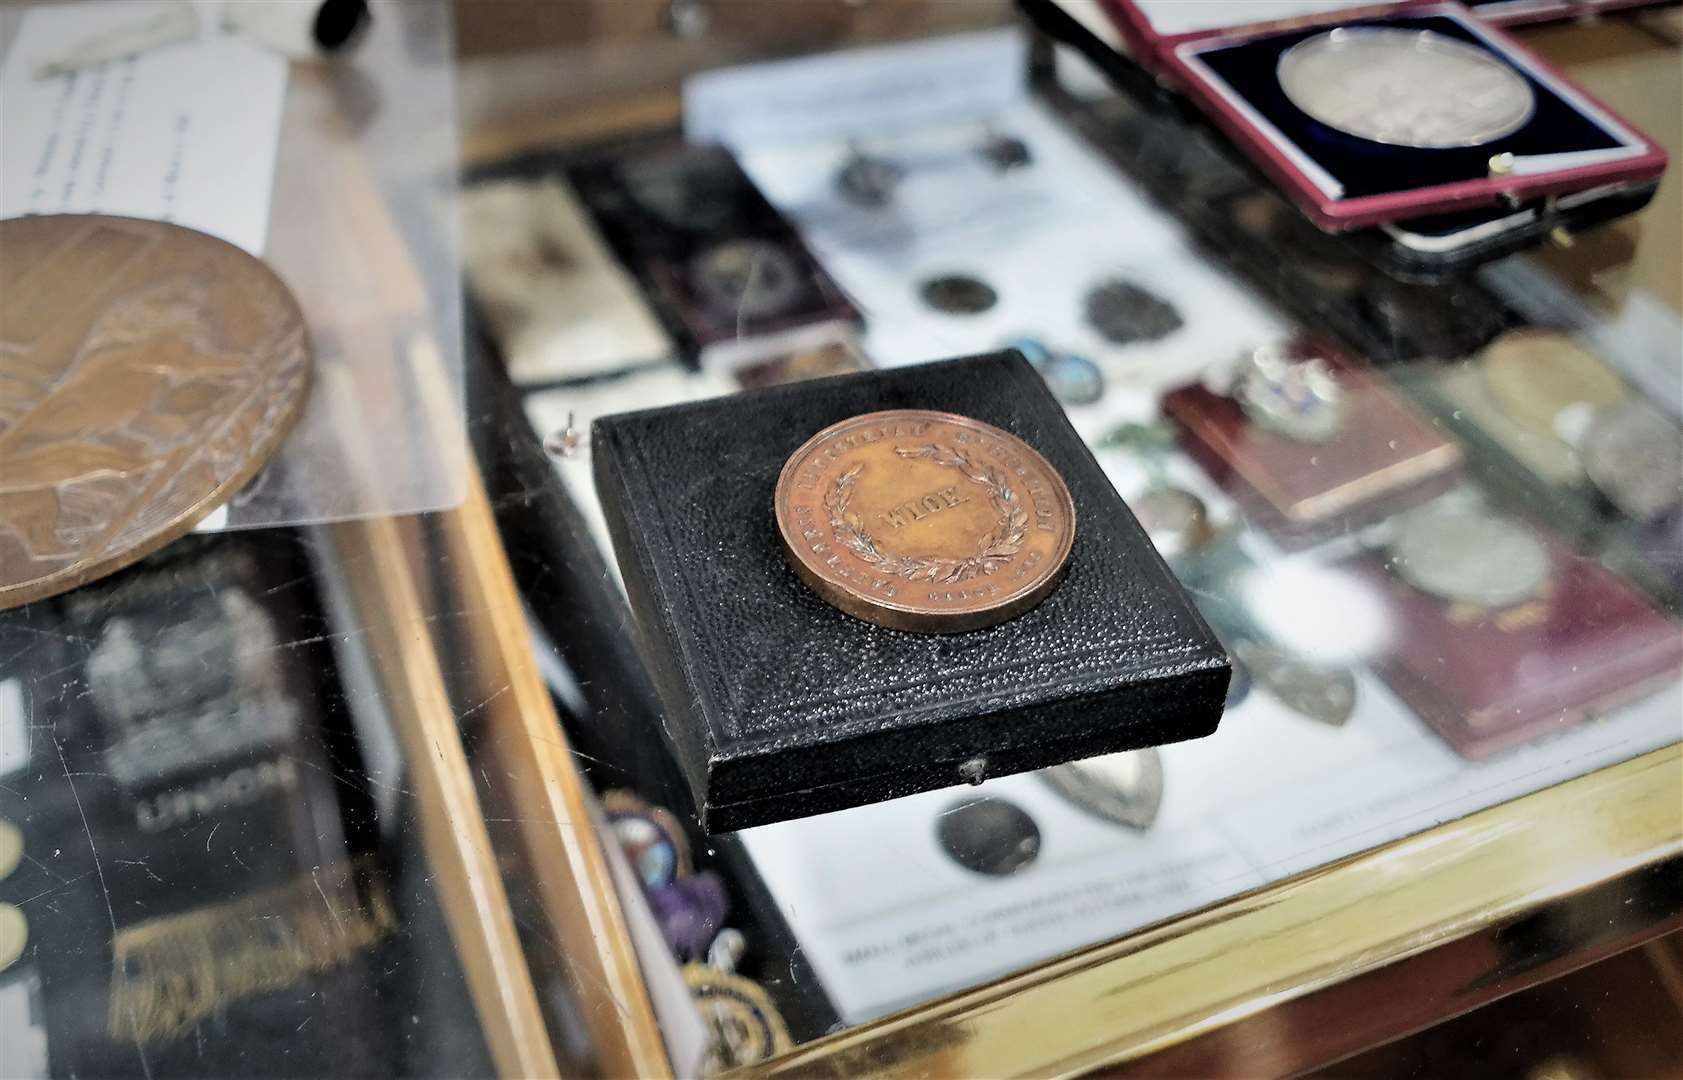 The bronze medal is dated 1868 and was made for the Caithness Industrial Exhibition of that year. It sits on the display case where it will be on show along with other historic medals.